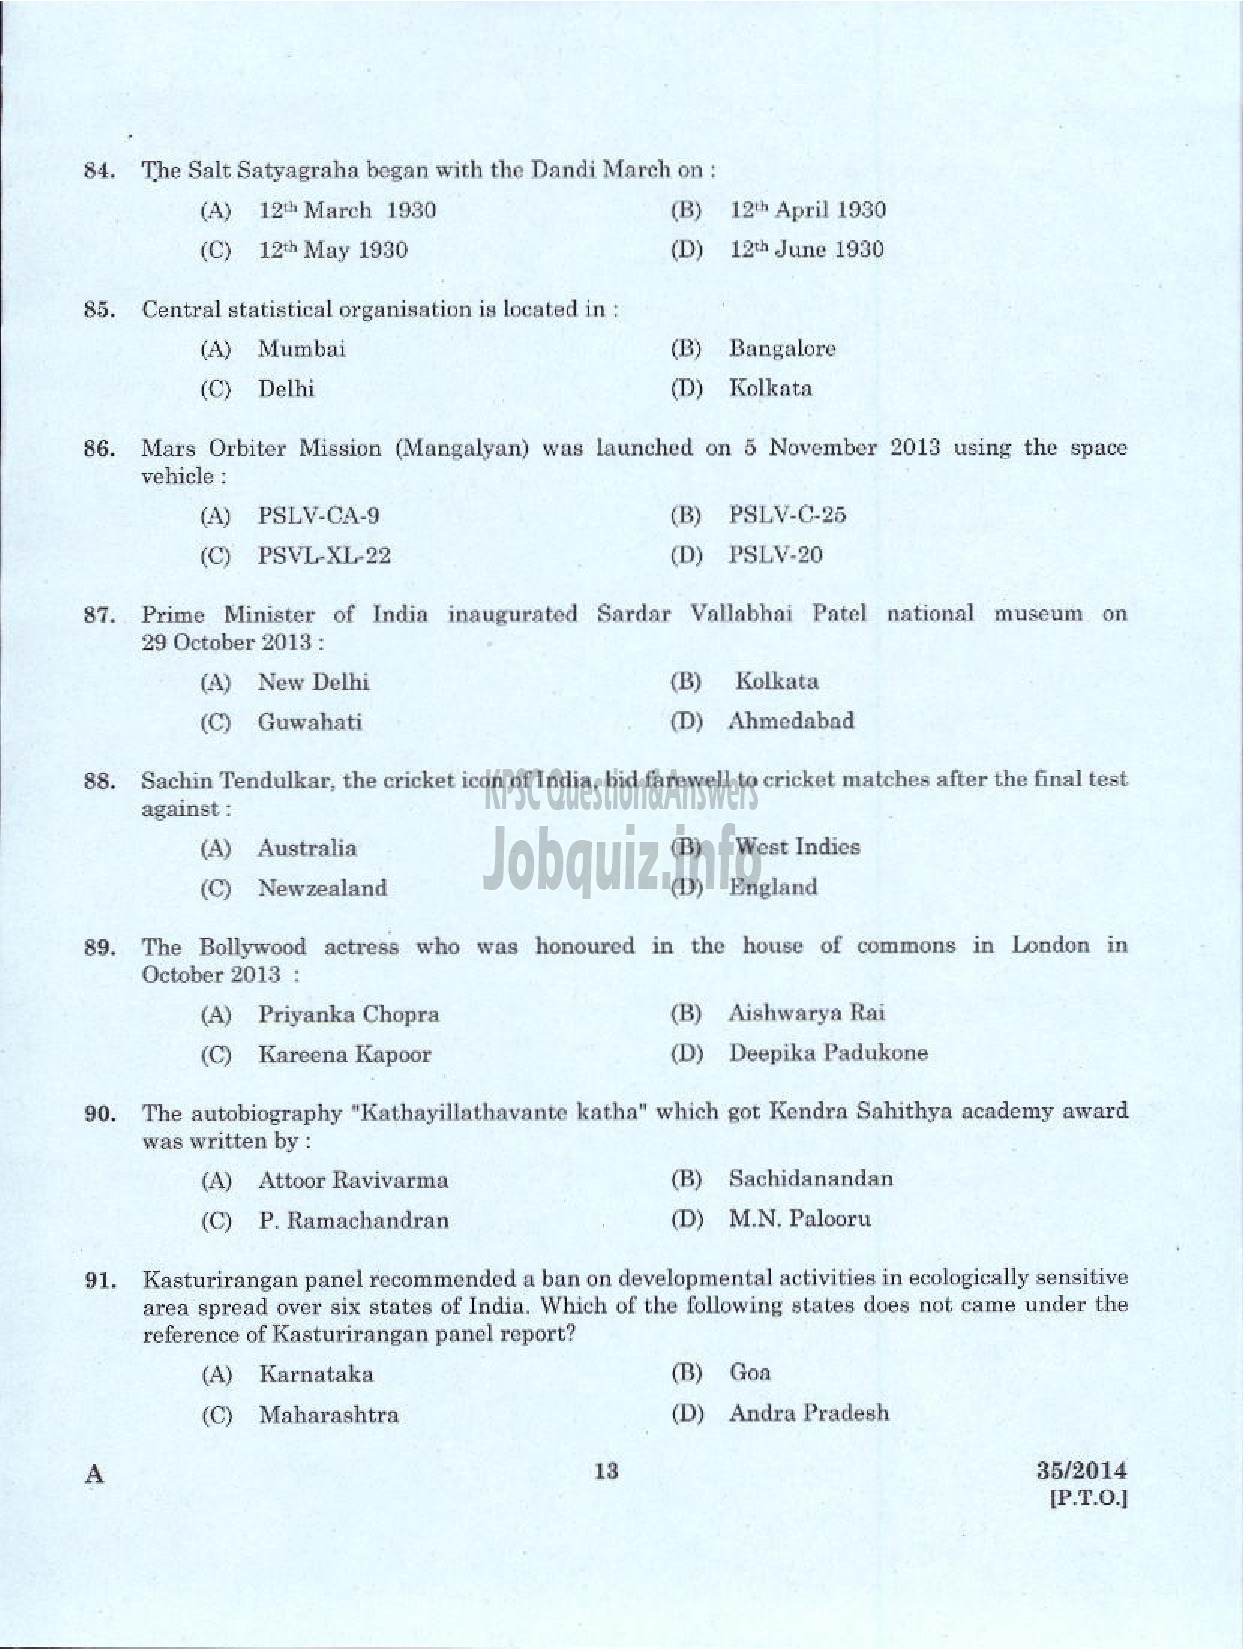 Kerala PSC Question Paper - JUNIOR ASSISTANT ACCOUNTS SR FOR ST ONLY TRAVANCORE COCHIN CHEMICALS LIMITED-11